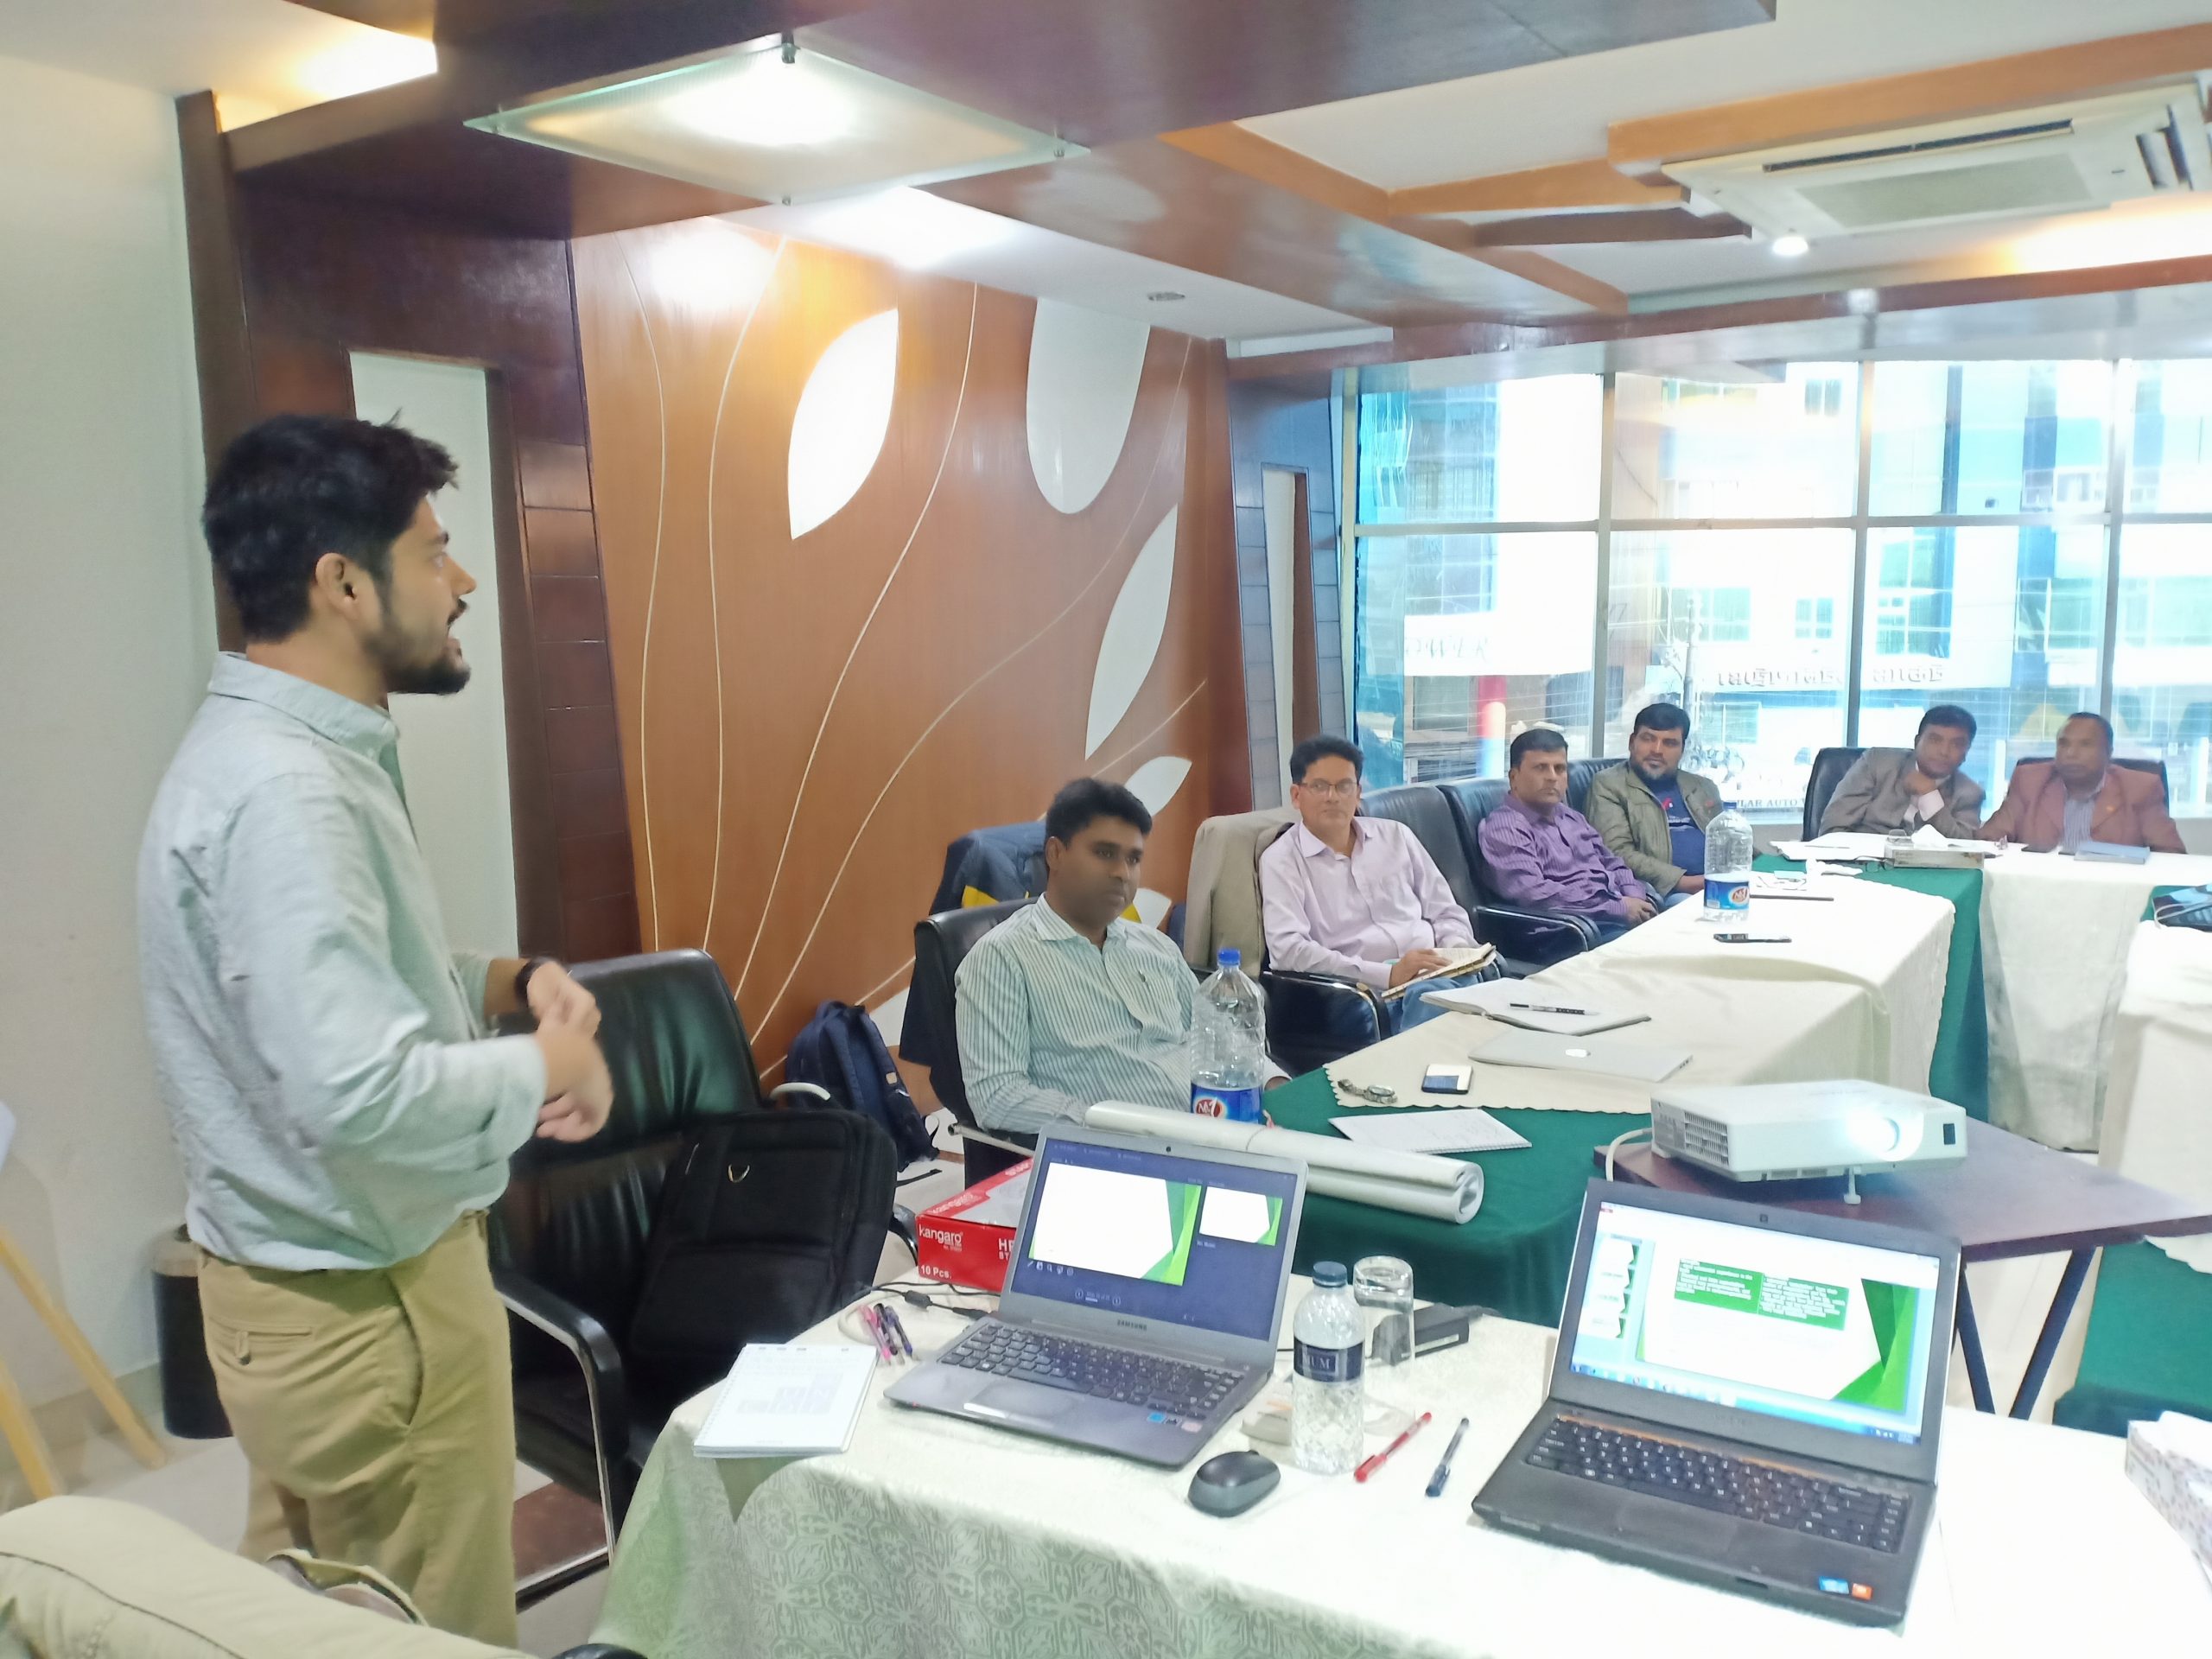 The Right Kind team providing a capacity building workshop in Sylhet to iDE Project Officers as part of a post evaluation of the Shucana Network Project